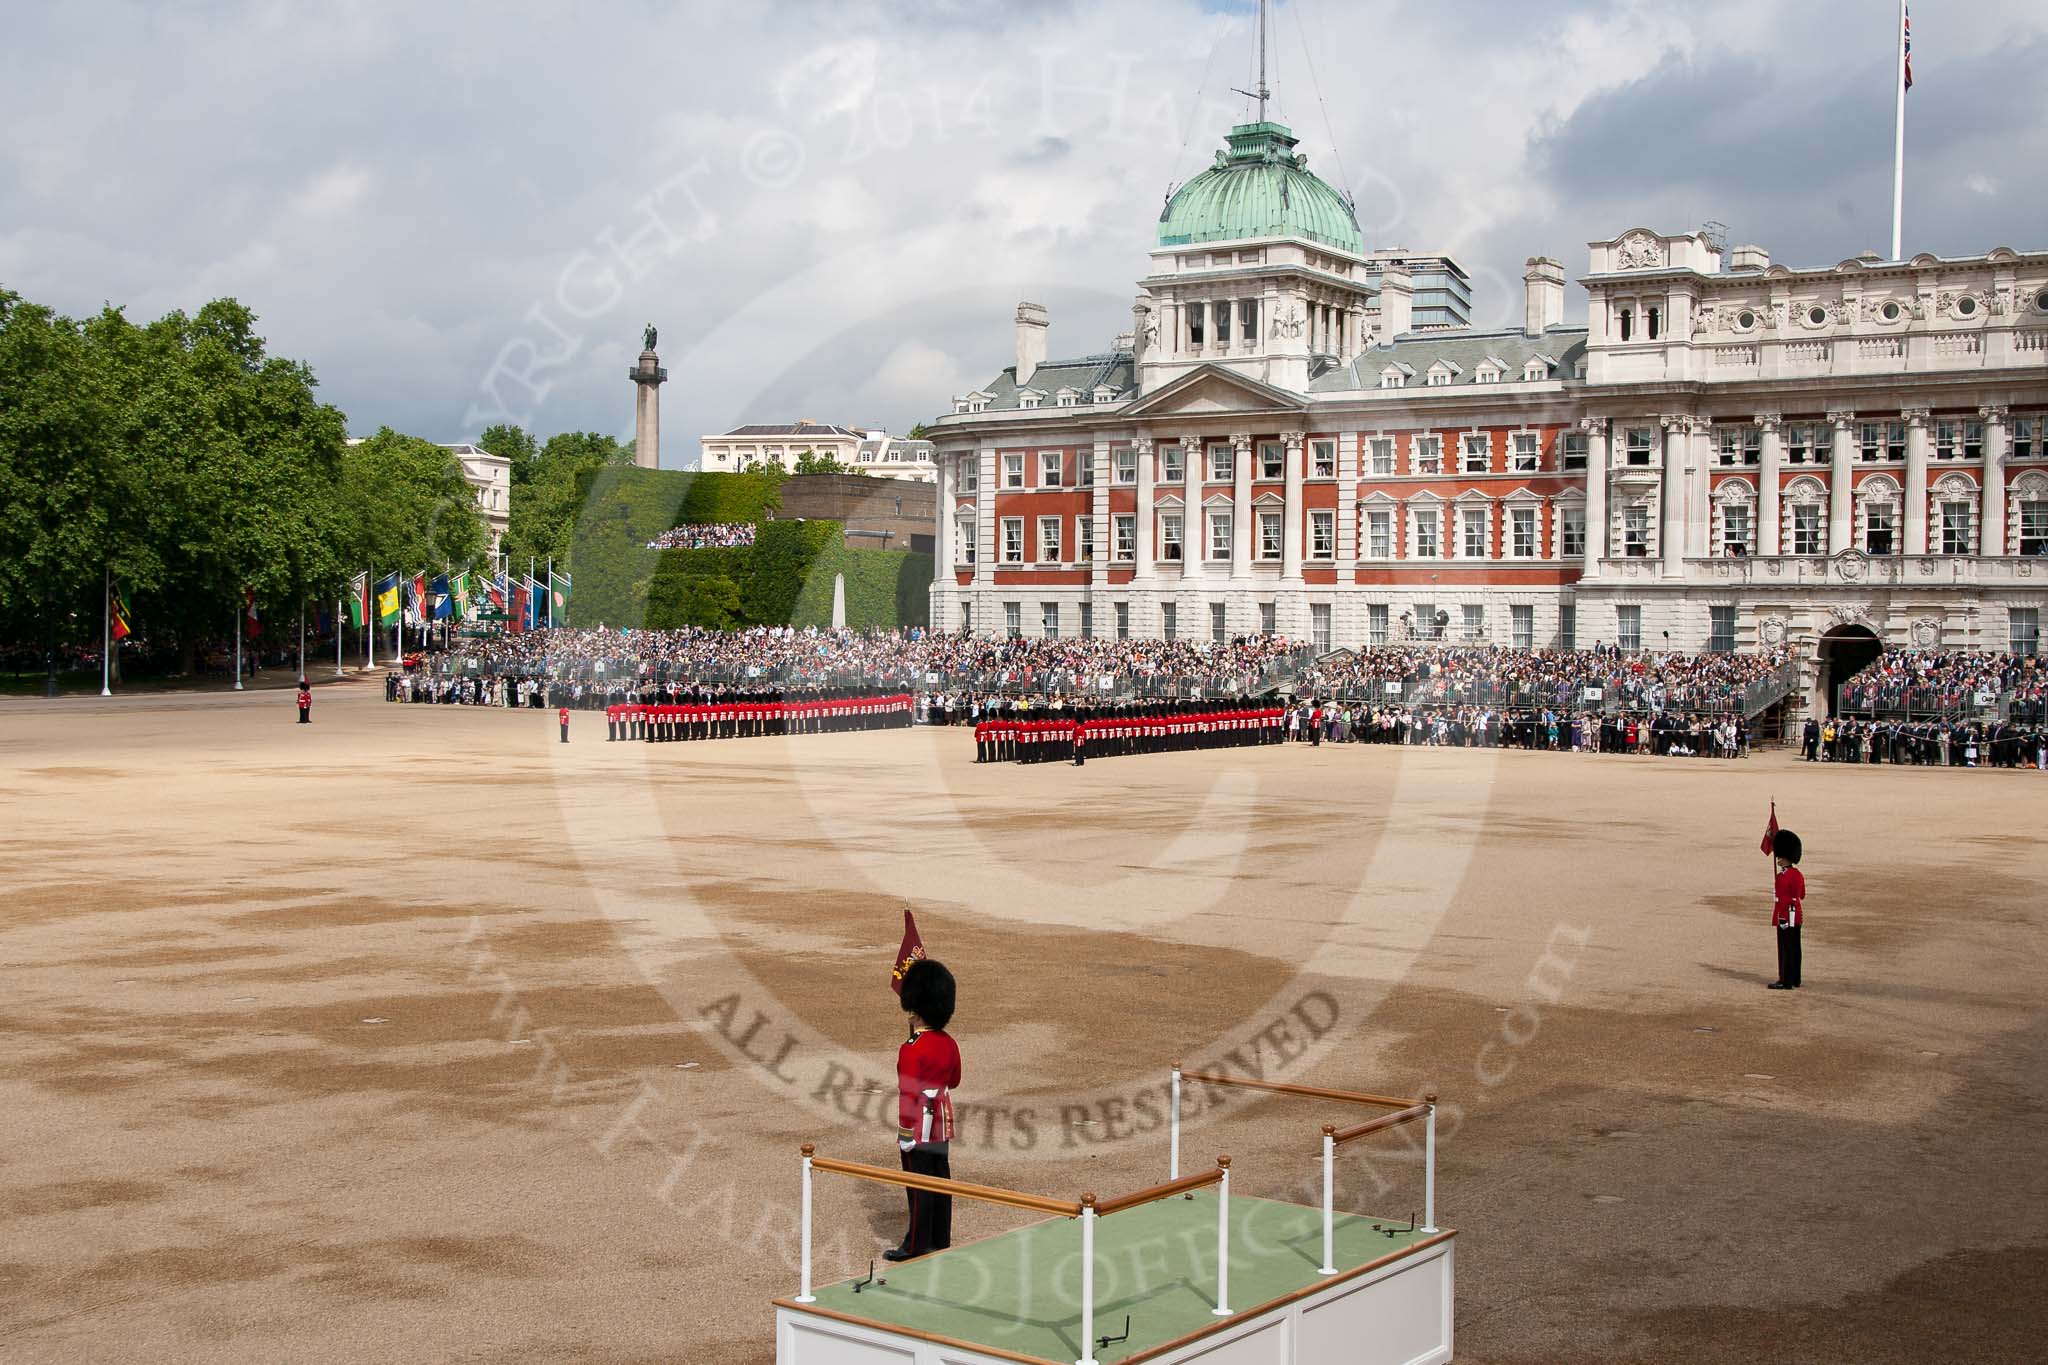 Trooping the Colour 2009: Horse Guards Parade an hour before the event. In front of the Old Admirality Building, No. 6 and No. 7 Guard are in position. The saluting base in the foreground will later be assembled and moved into position..
Horse Guards Parade, Westminster,
London SW1,

United Kingdom,
on 13 June 2009 at 10:27, image #51